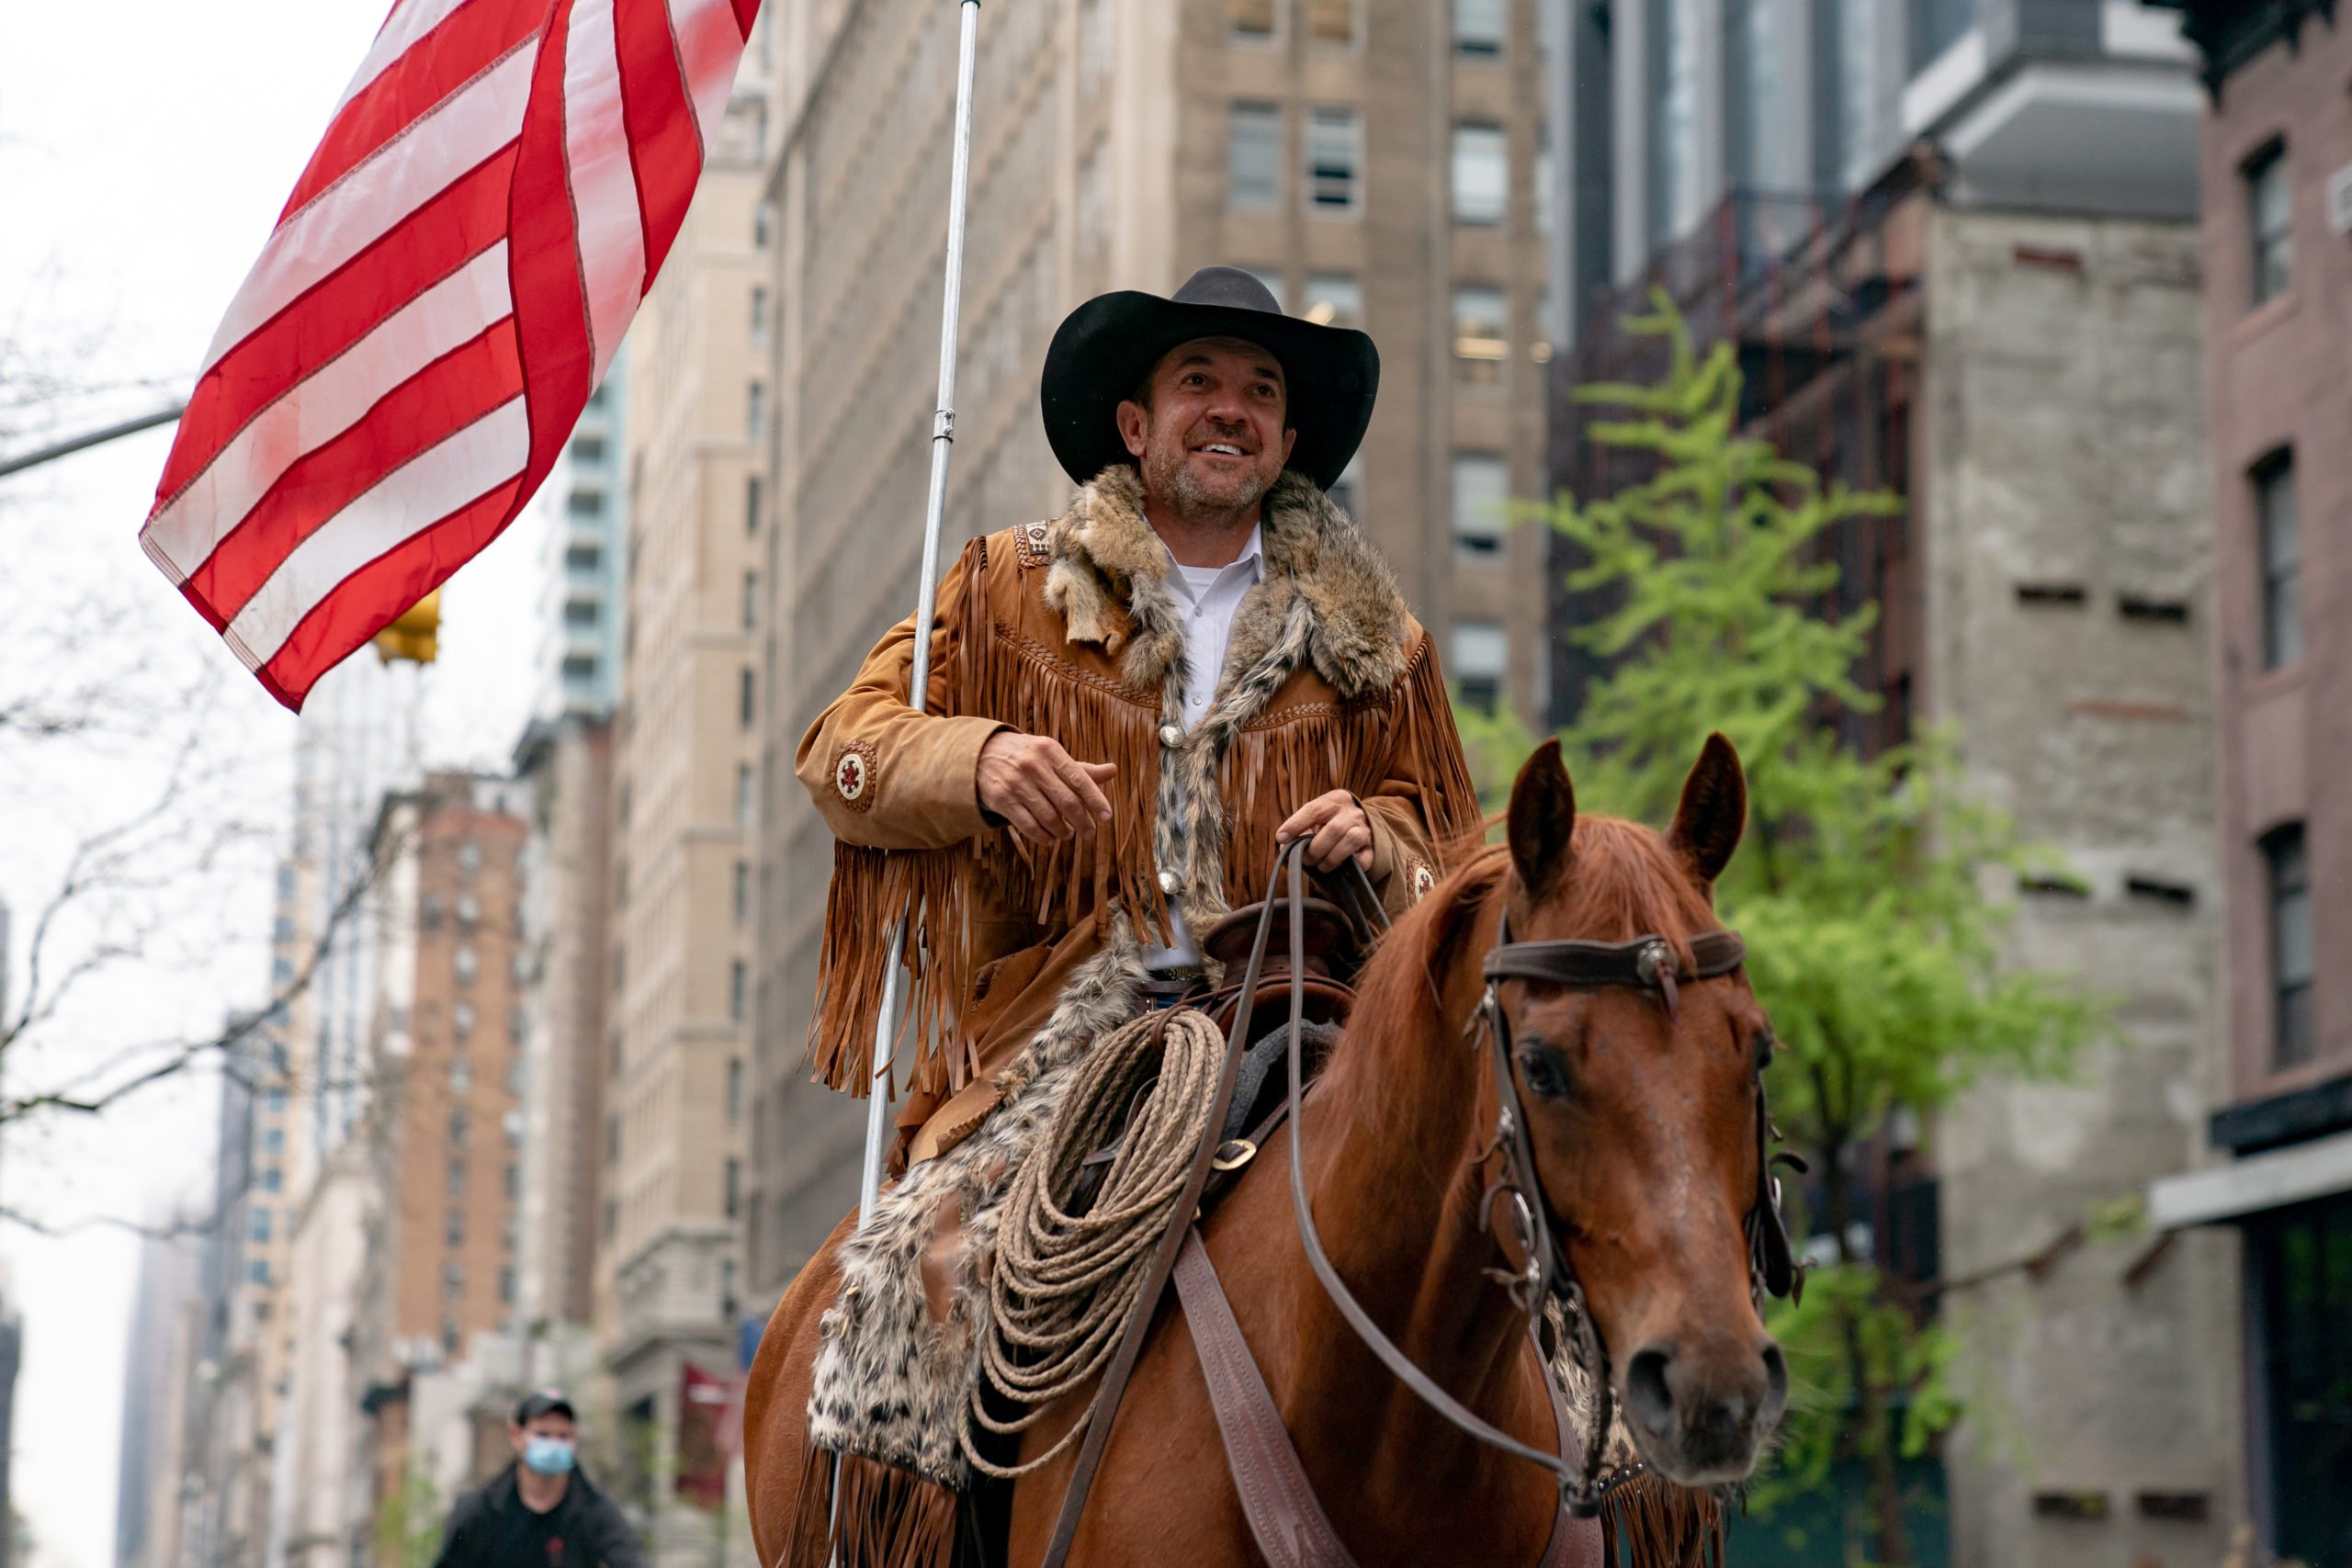 NEW YORK, NY - MAY 01: Otero County Commission Chairman and Cowboys for Trump co-founder Couy Griffin rides his horse on 5th avenue on May 1, 2020 in New York City. (Photo by Jeenah Moon/Getty Images)